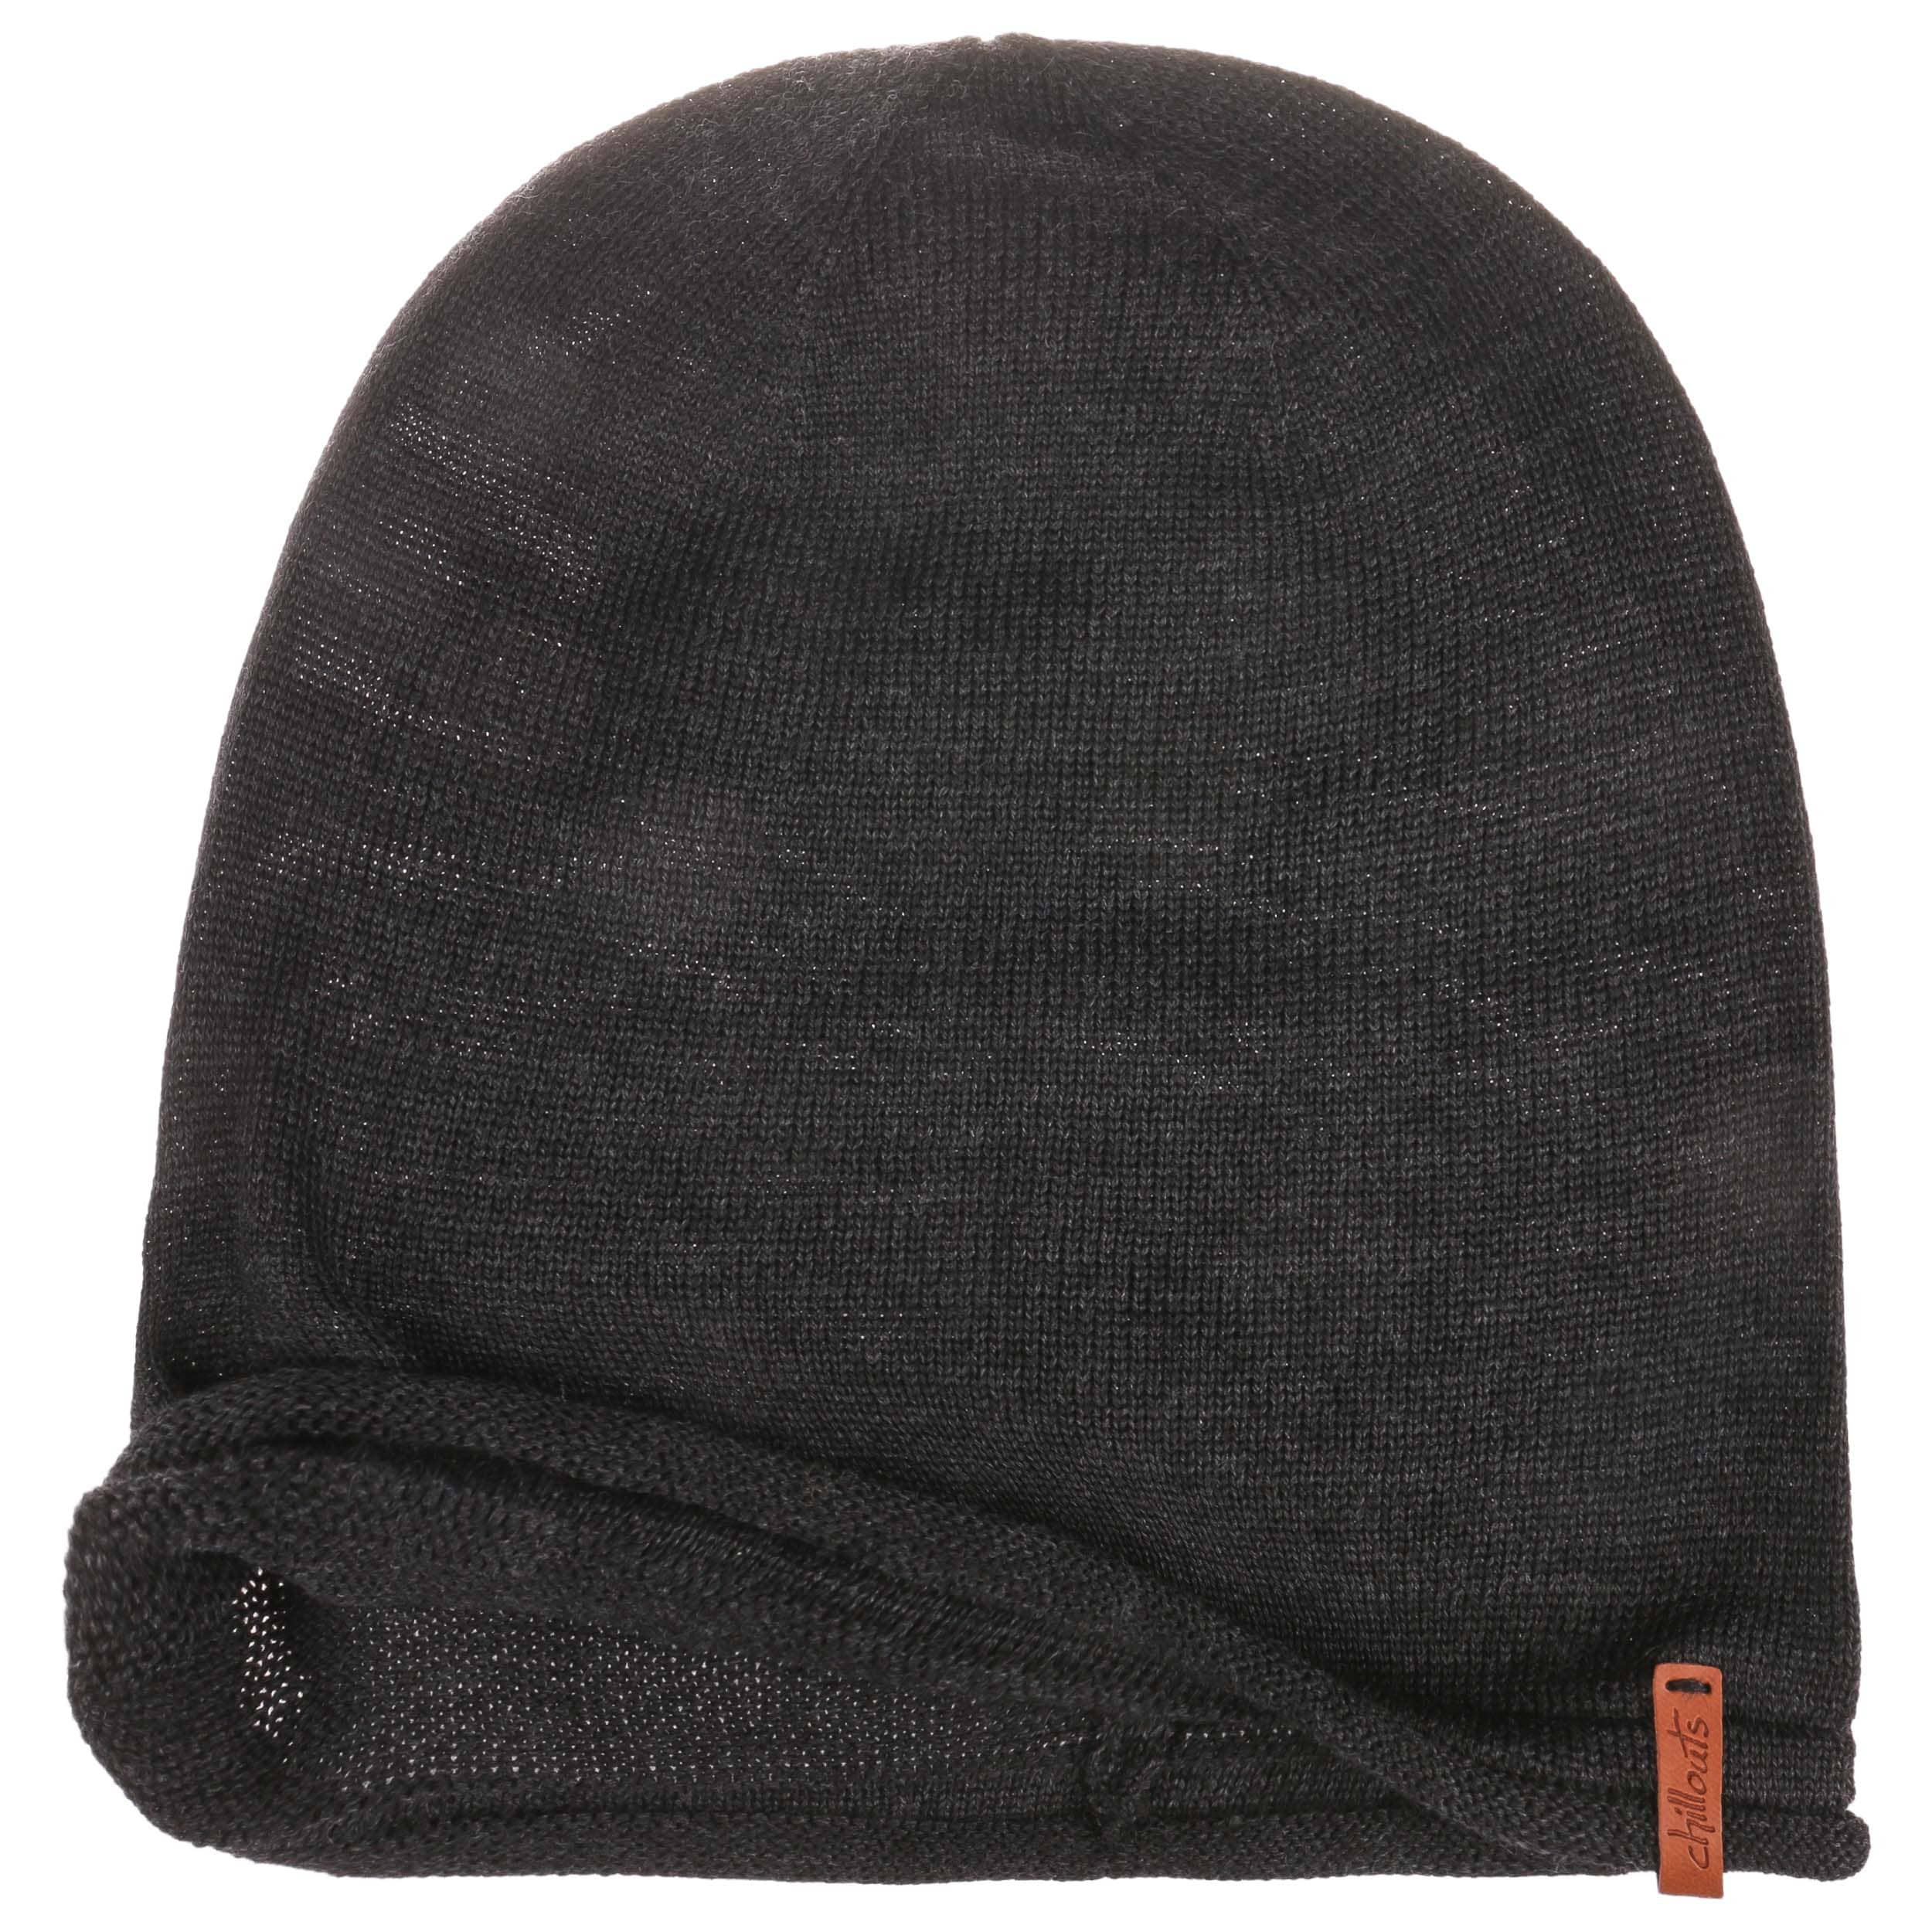 Leicester Oversize Beanie by Chillouts € - 29,95